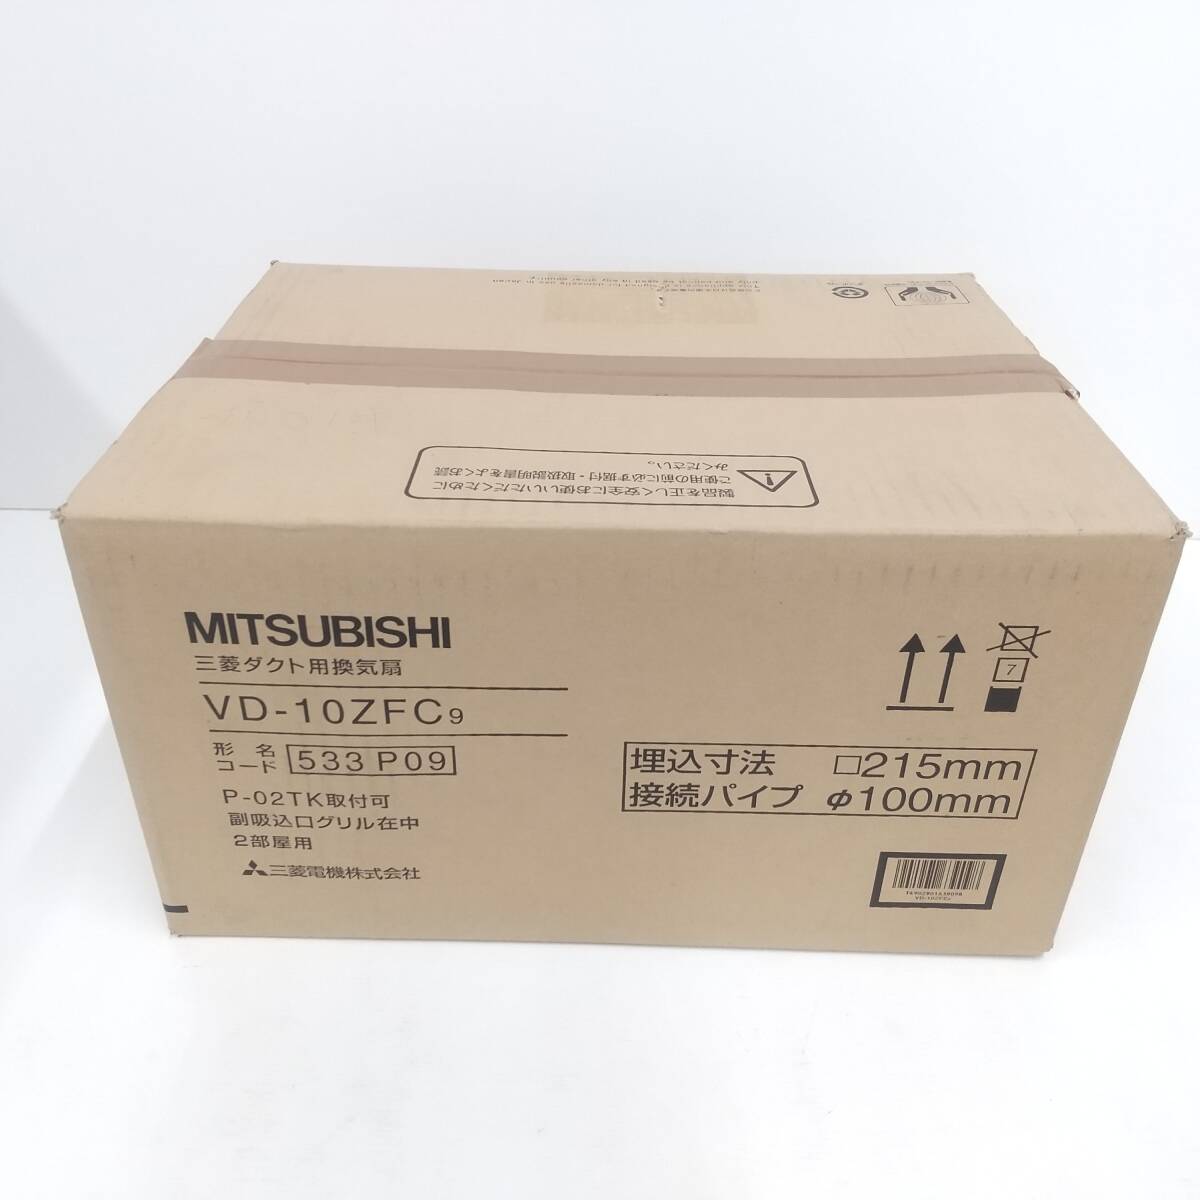 1980[ new goods unopened goods ] duct for exhaust fan ceiling . included shape VD-10ZFC9 Mitsubishi 